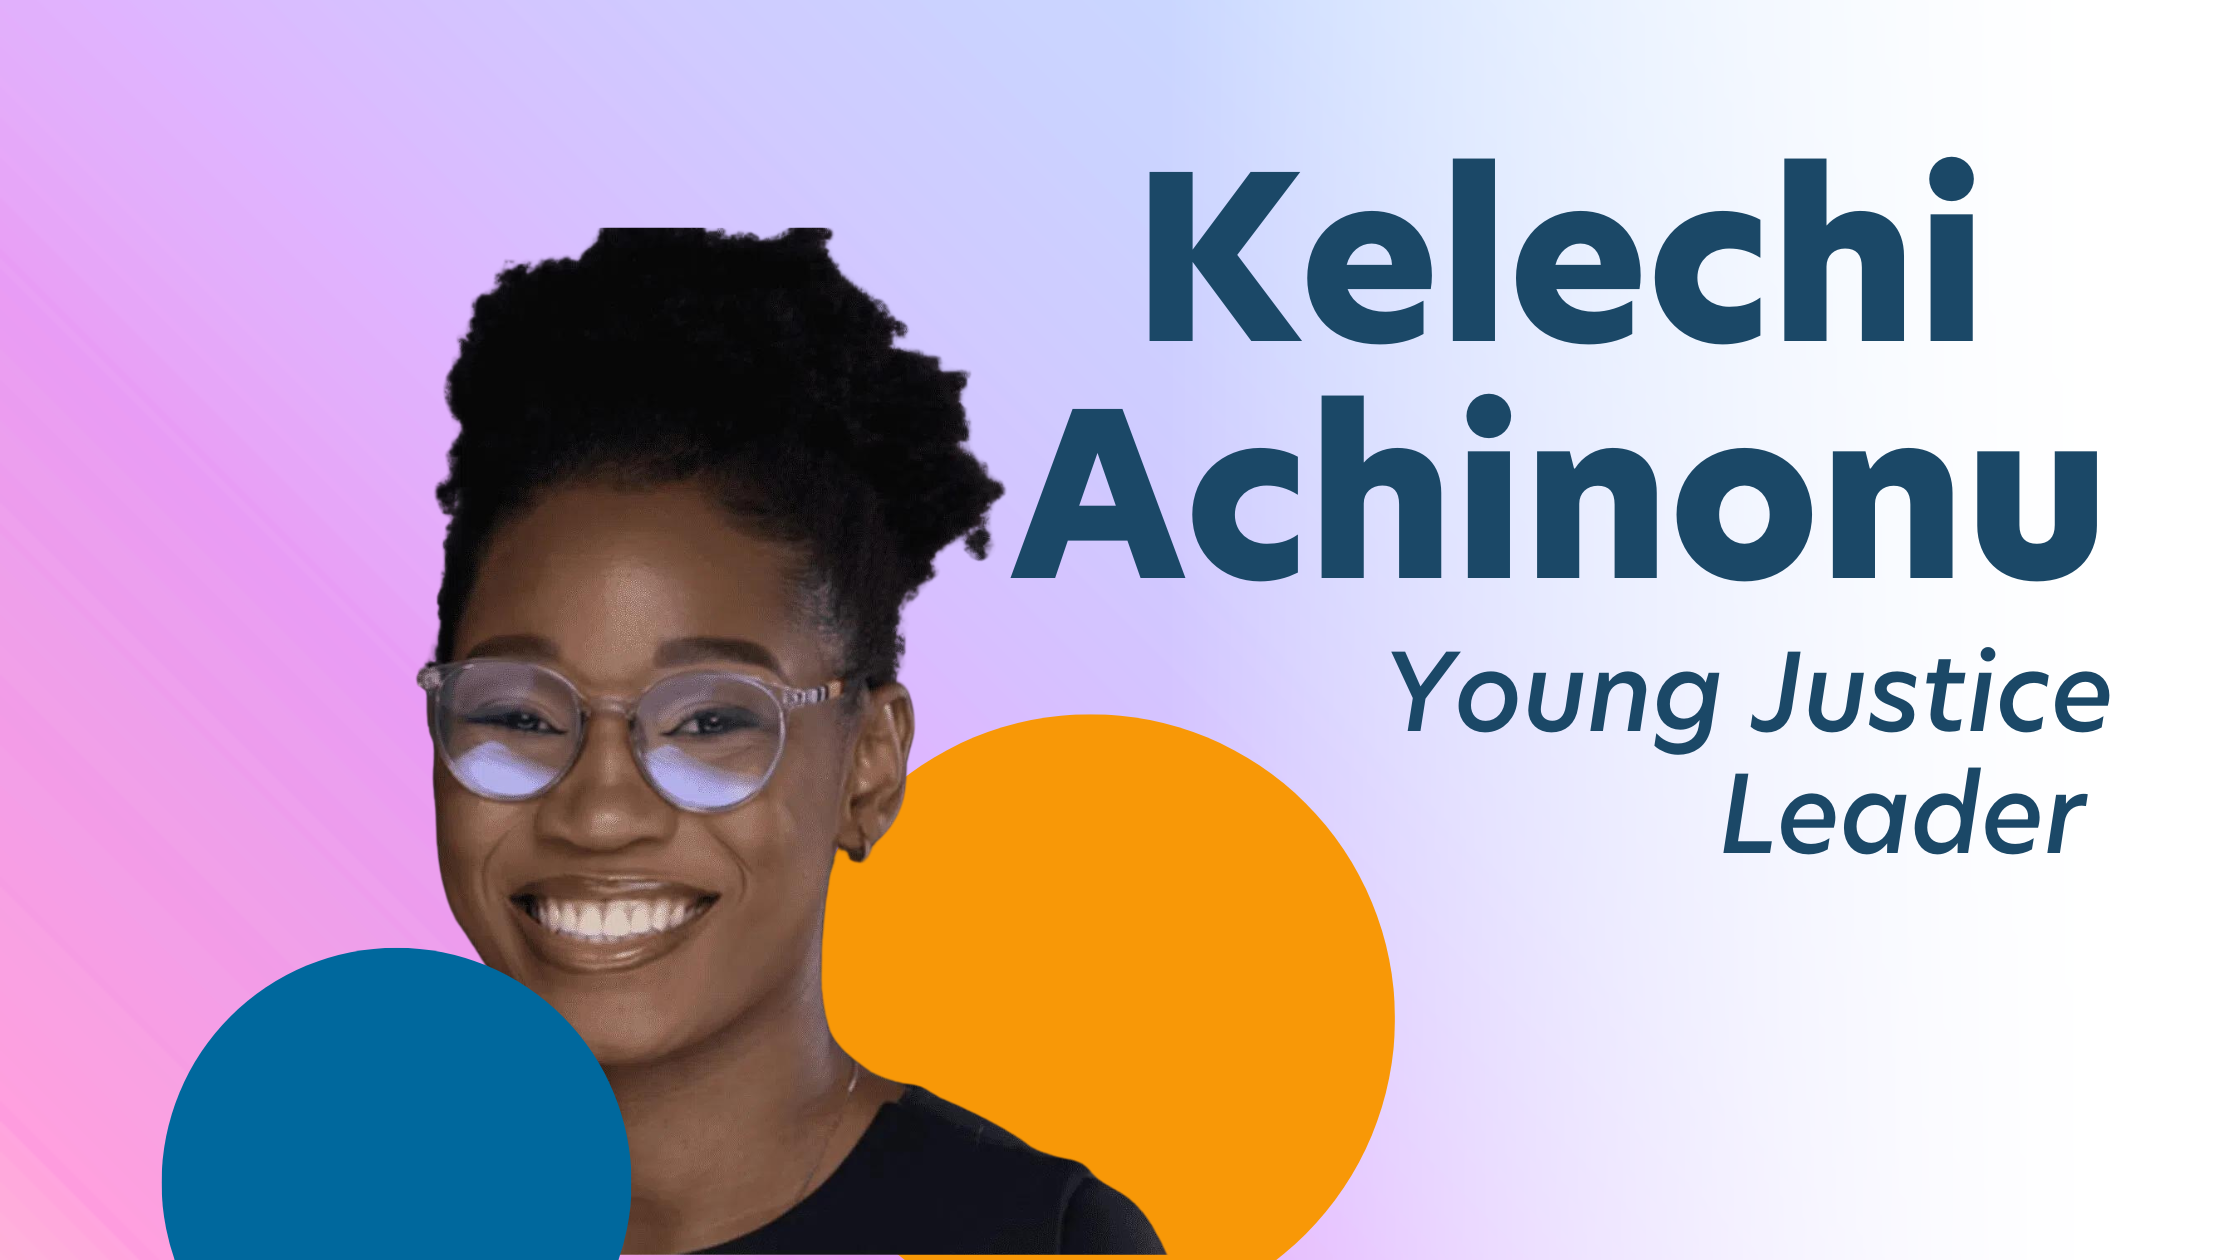 Gradient (pink-purple) background with a headshot of a person with glasses. Text reads: "Kelechi Achinonu; Young Justice Leader"